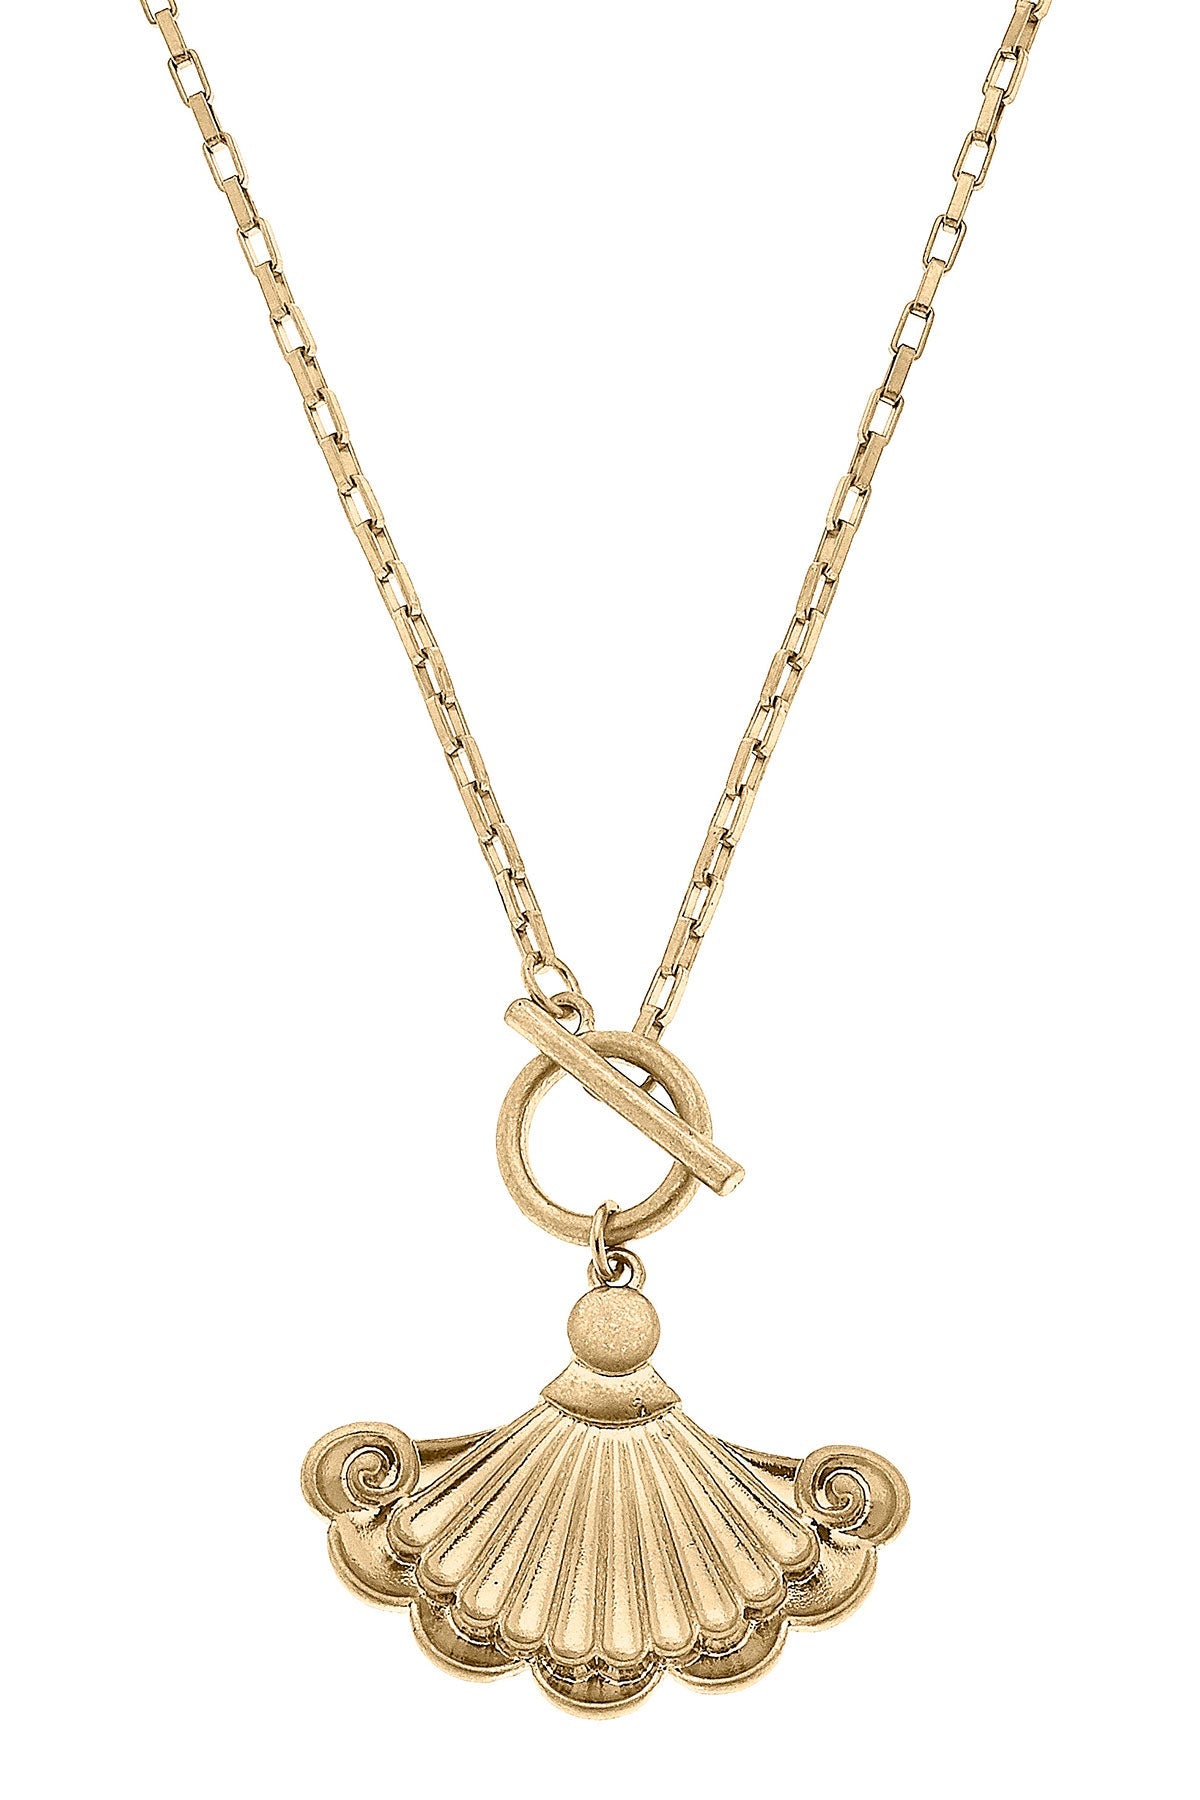 InÃ¨s French Fan Pendant T-Bar Necklace in Worn Gold